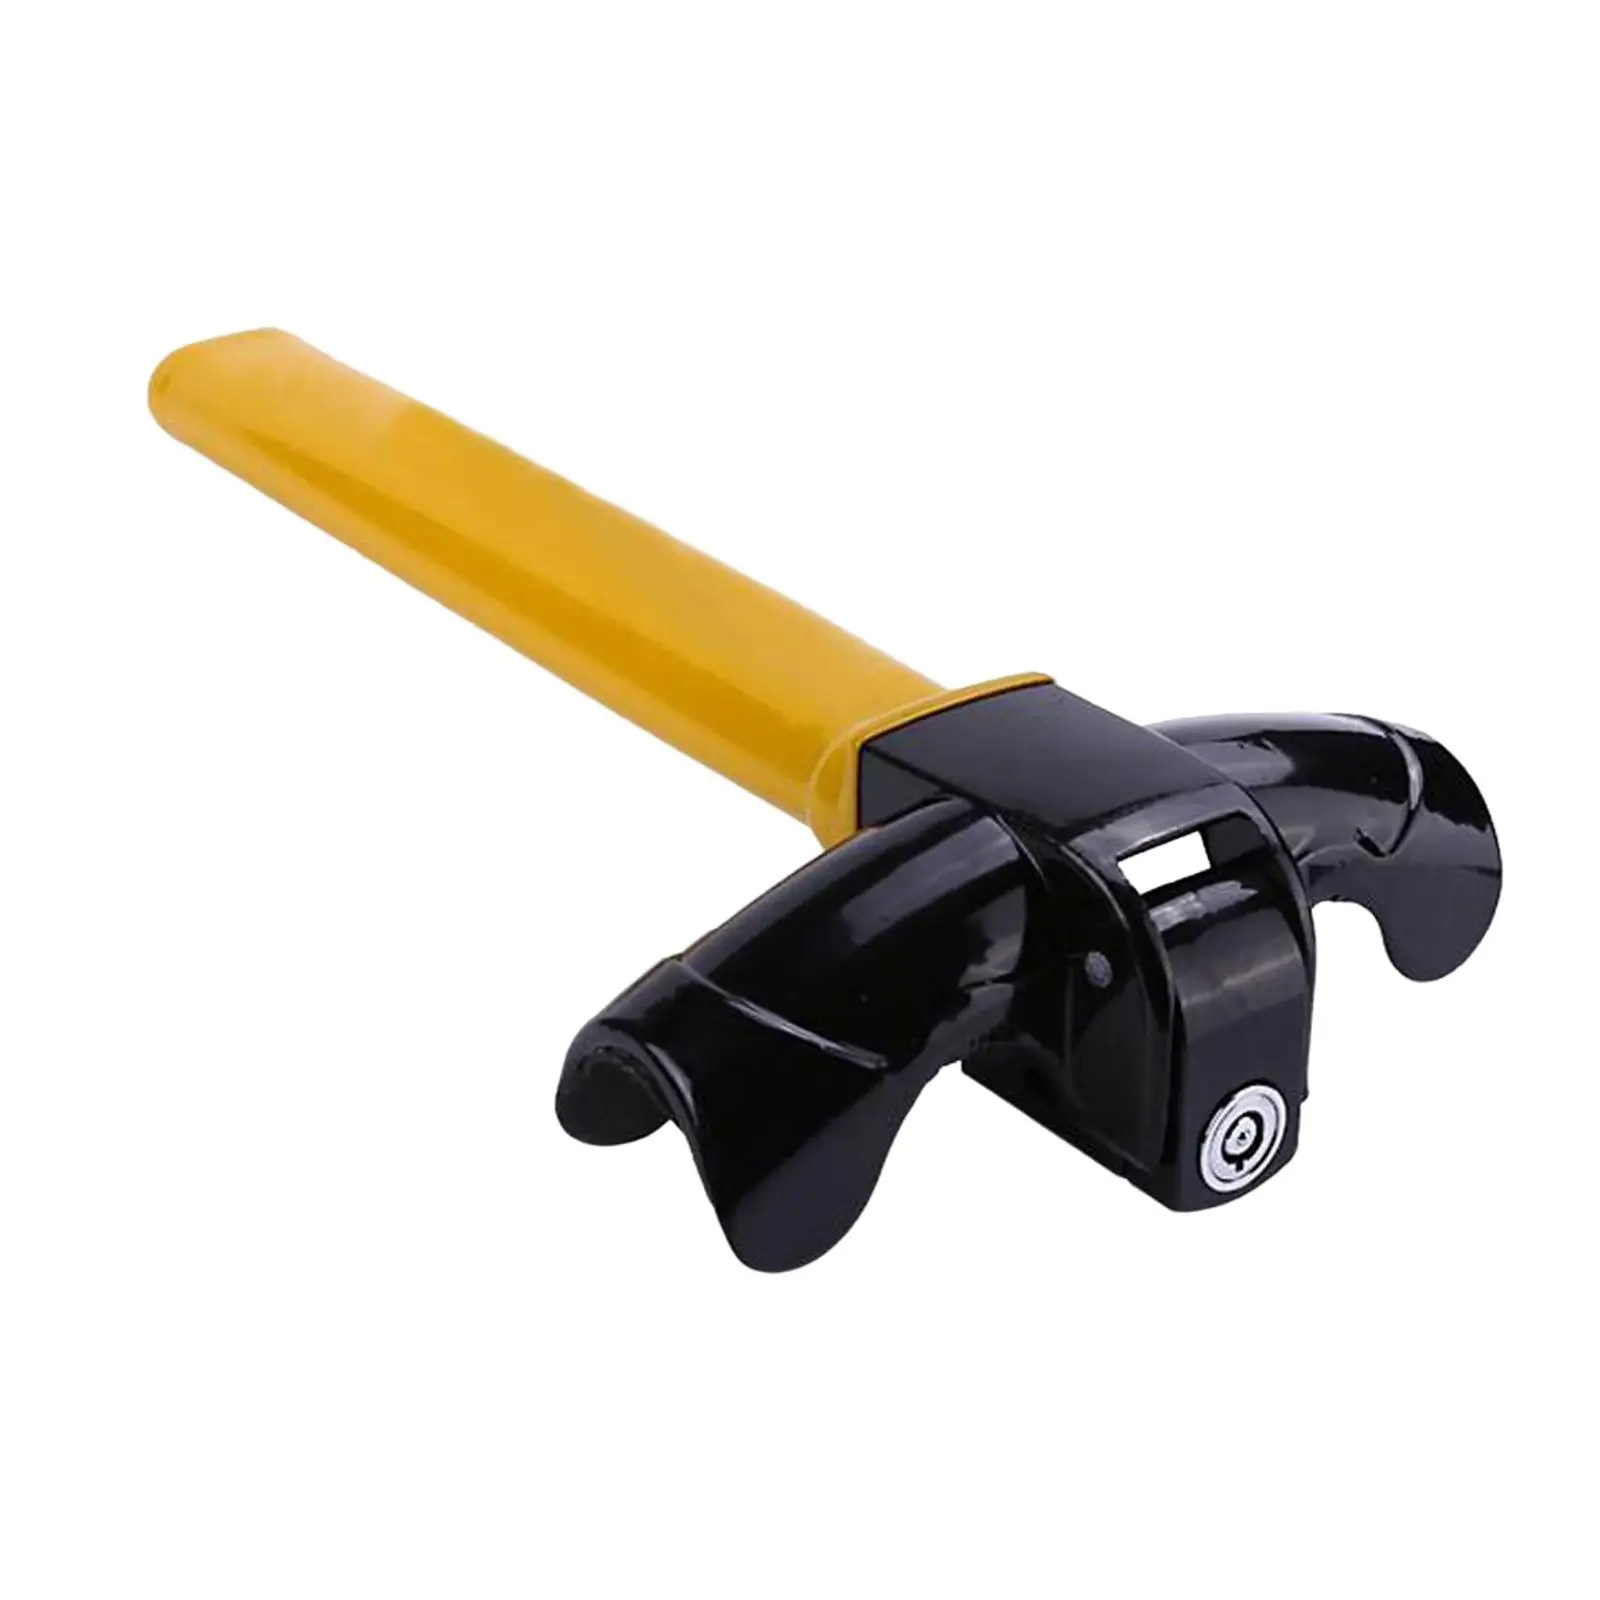 T Shaped Steering Wheel Lock Tool Curved Design Handle Durable for SUV